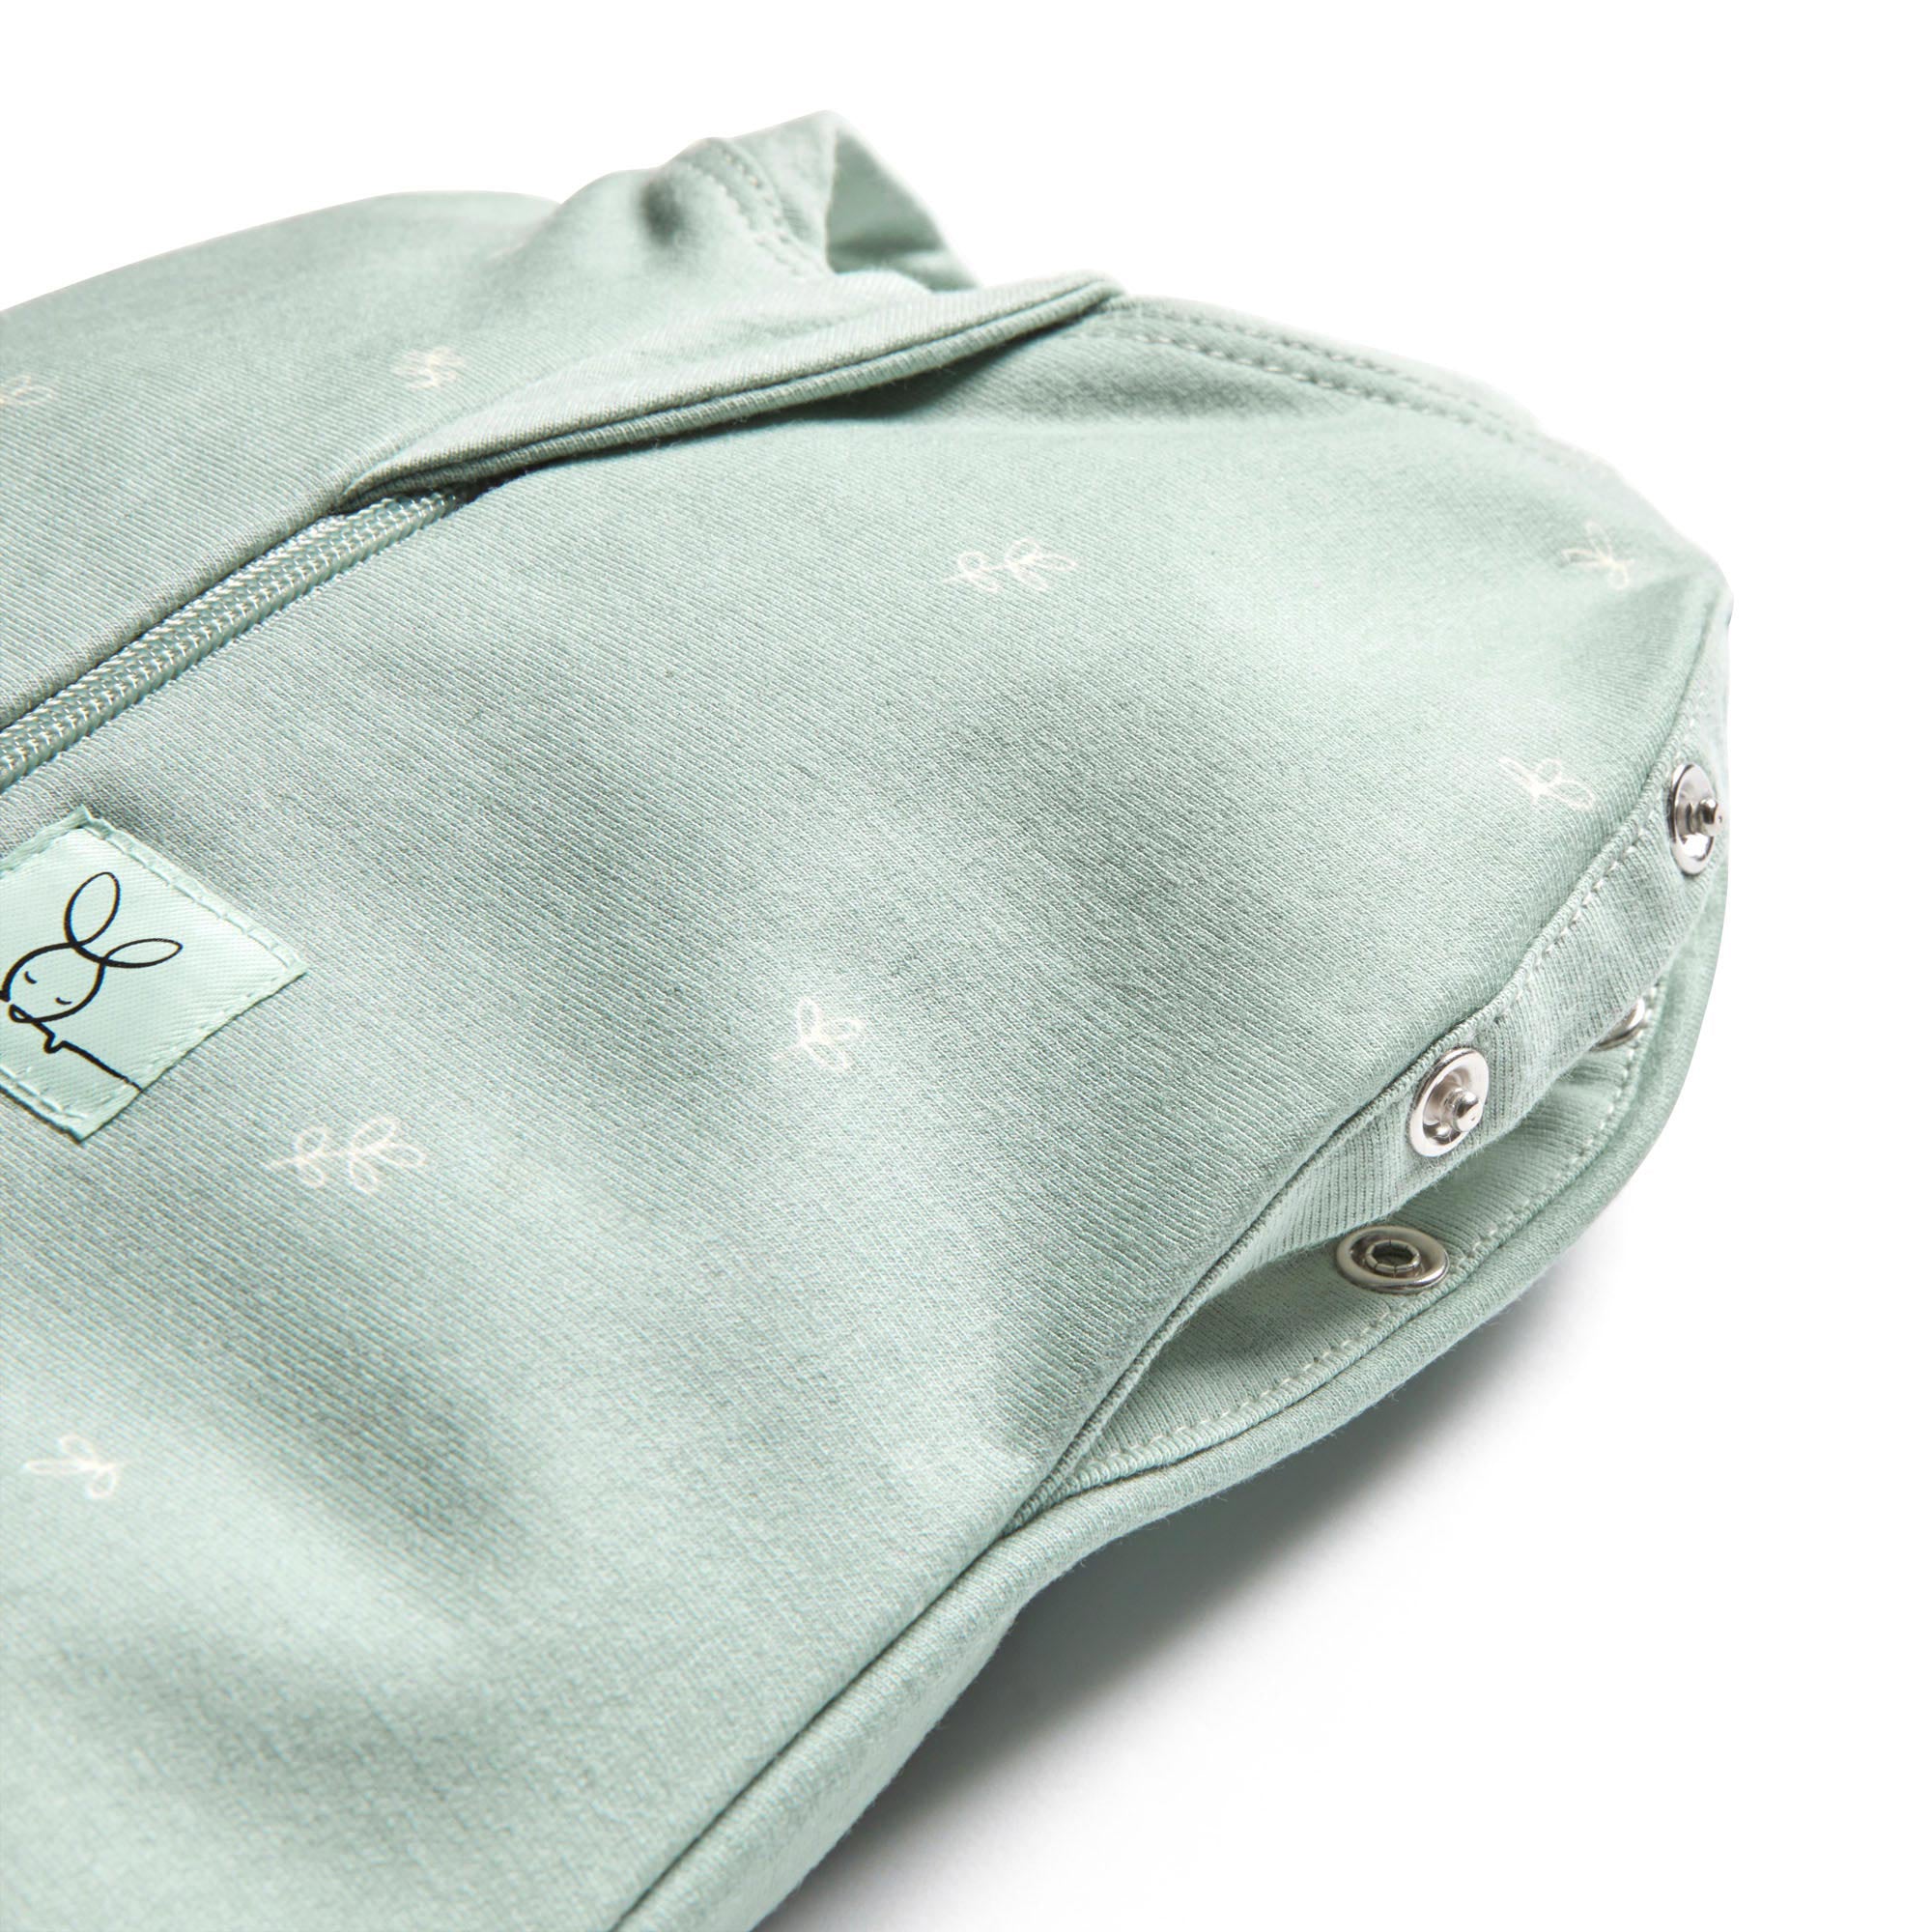 ergopouch-cocoon-swaddle-bag-0-2-tog-night-sky-ergo-zepco-0-2t00-03mns20- (2)